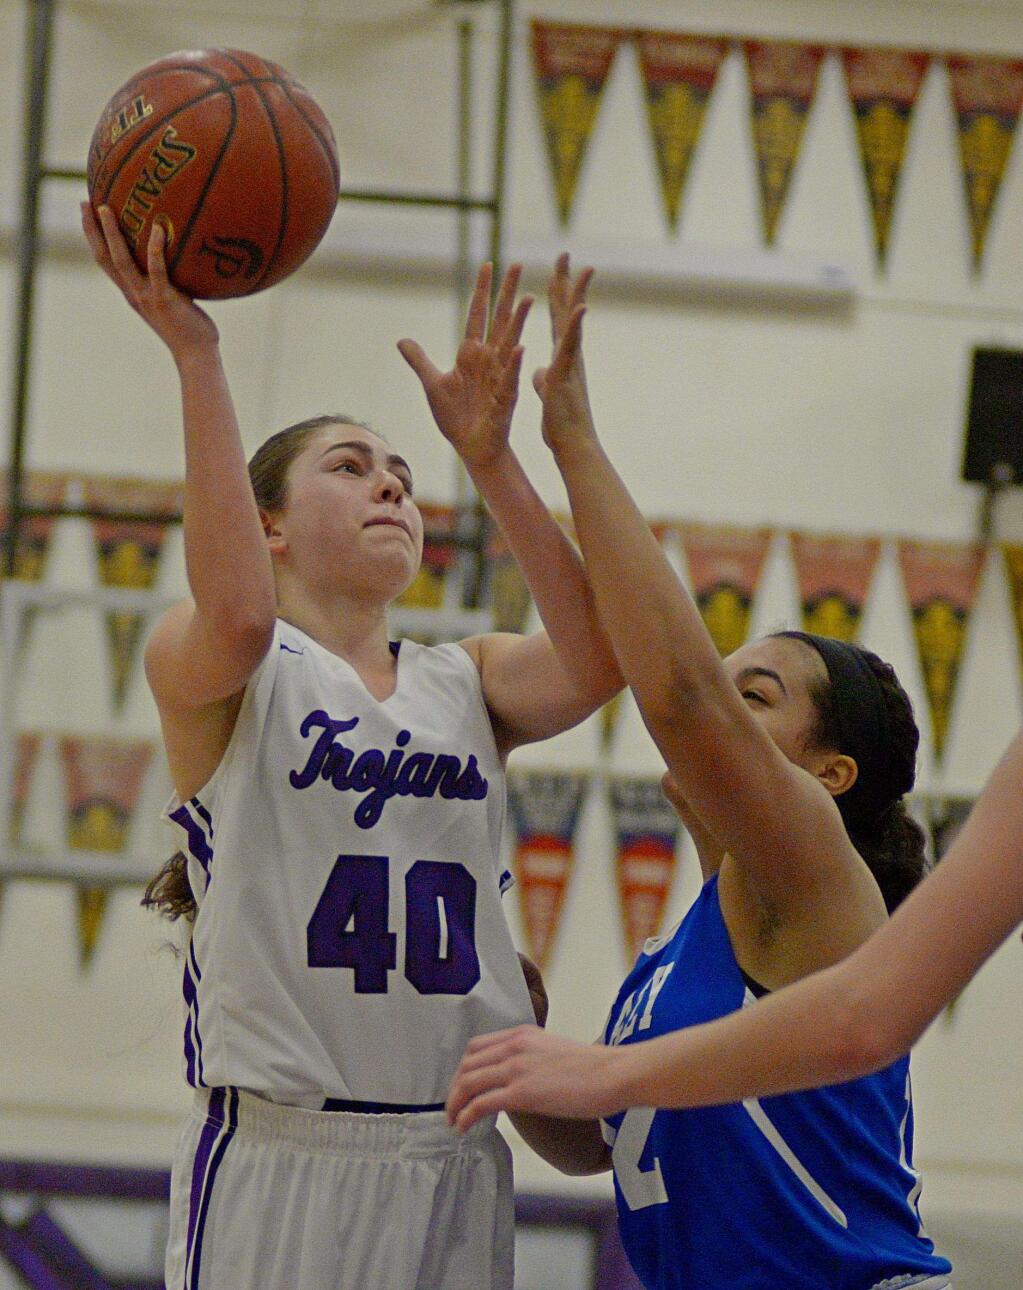 SUMNER FOWLER/FOR THE ARGUS-COURIERSheriene Arikat and Petaluma's T-Girls host Casa Grande in the first round of the North Coast Section playoffs Tuesday night. Tipoff is at 7 p.m.